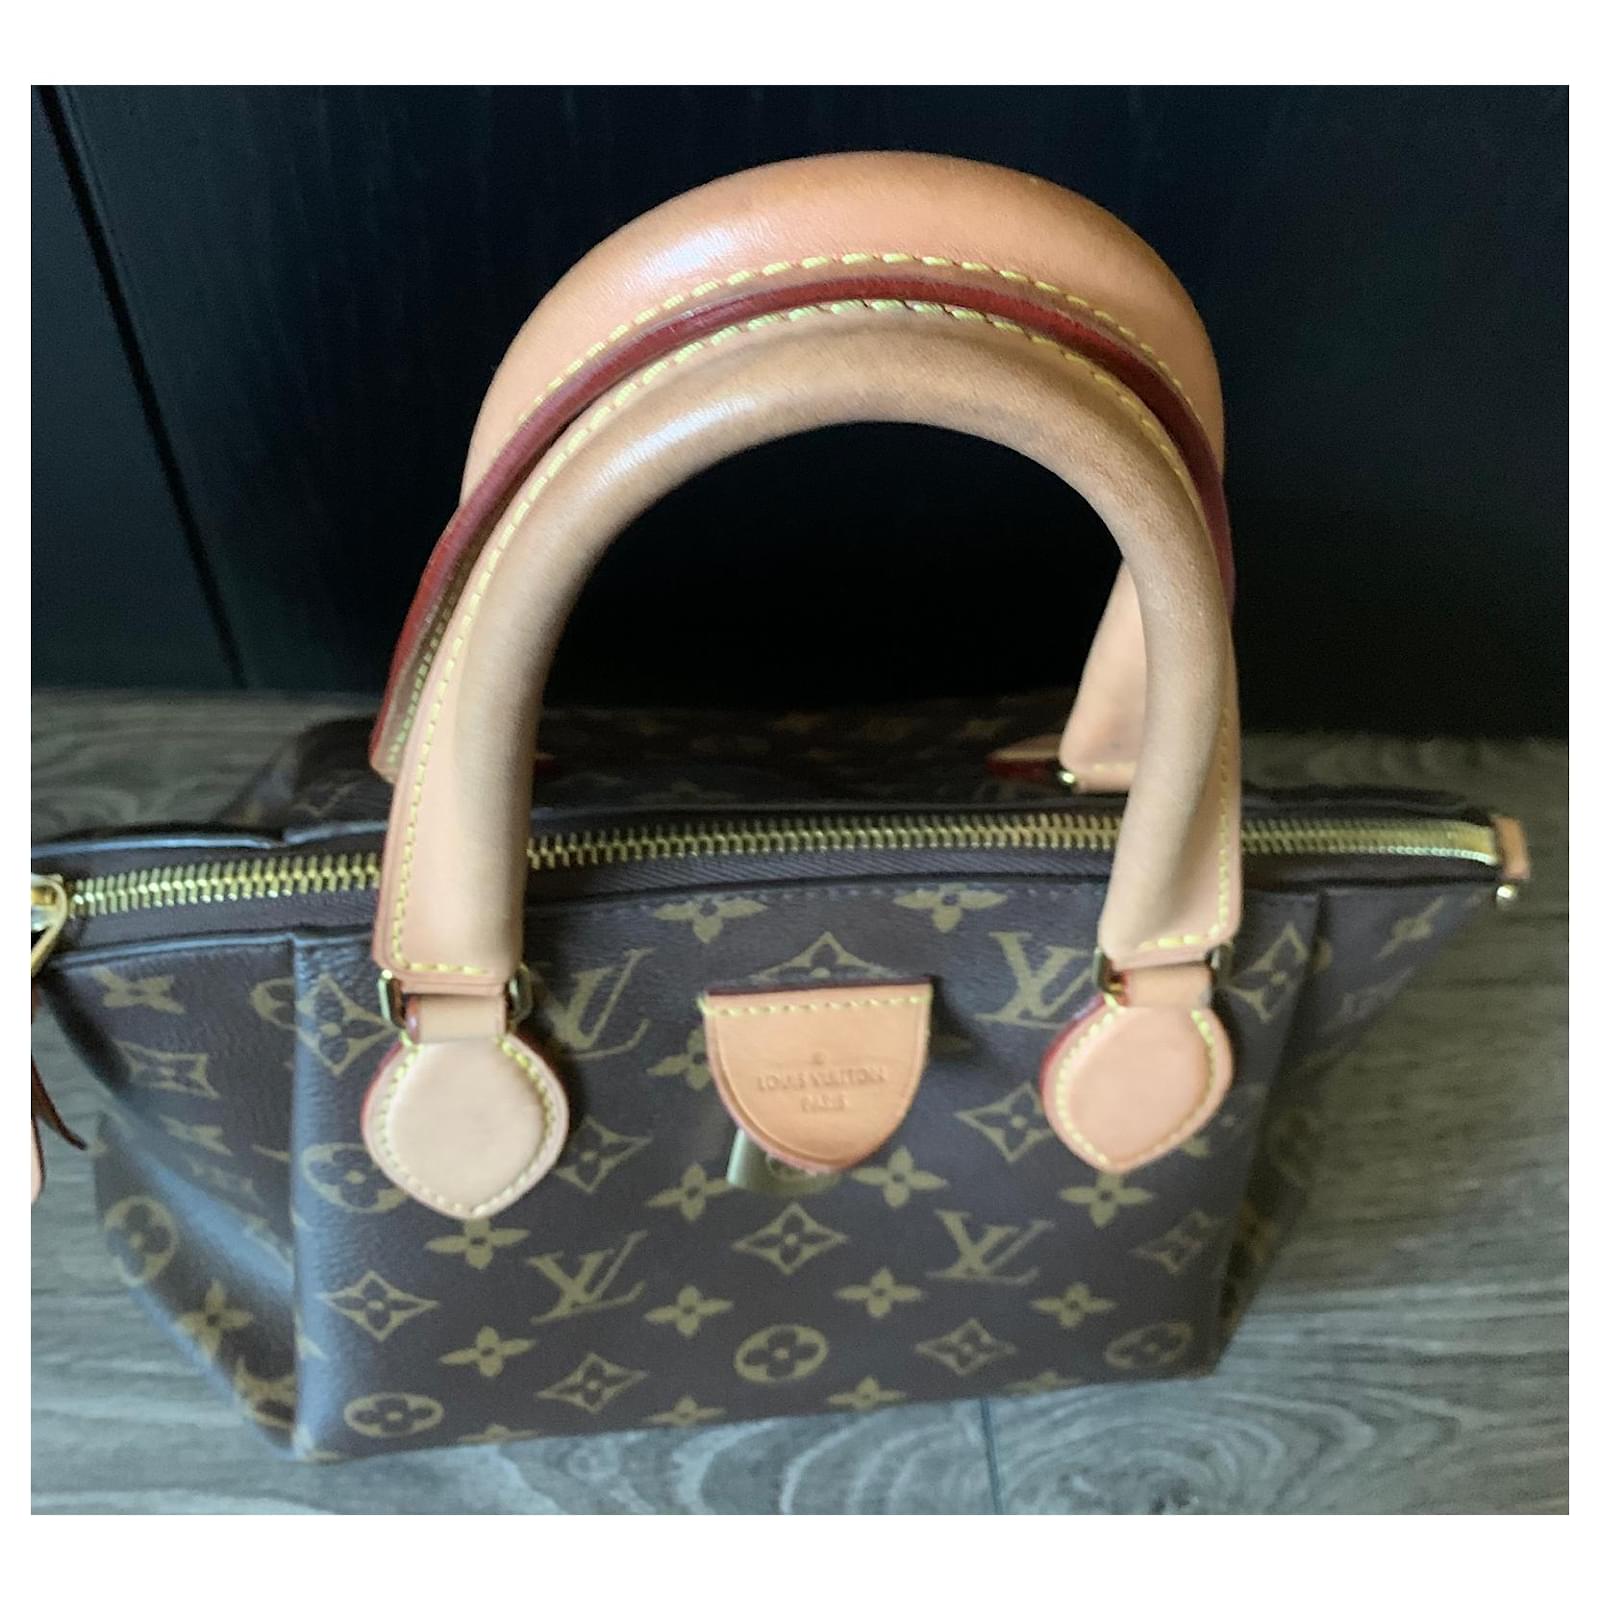 Products By Louis Vuitton: Rivoli Pm